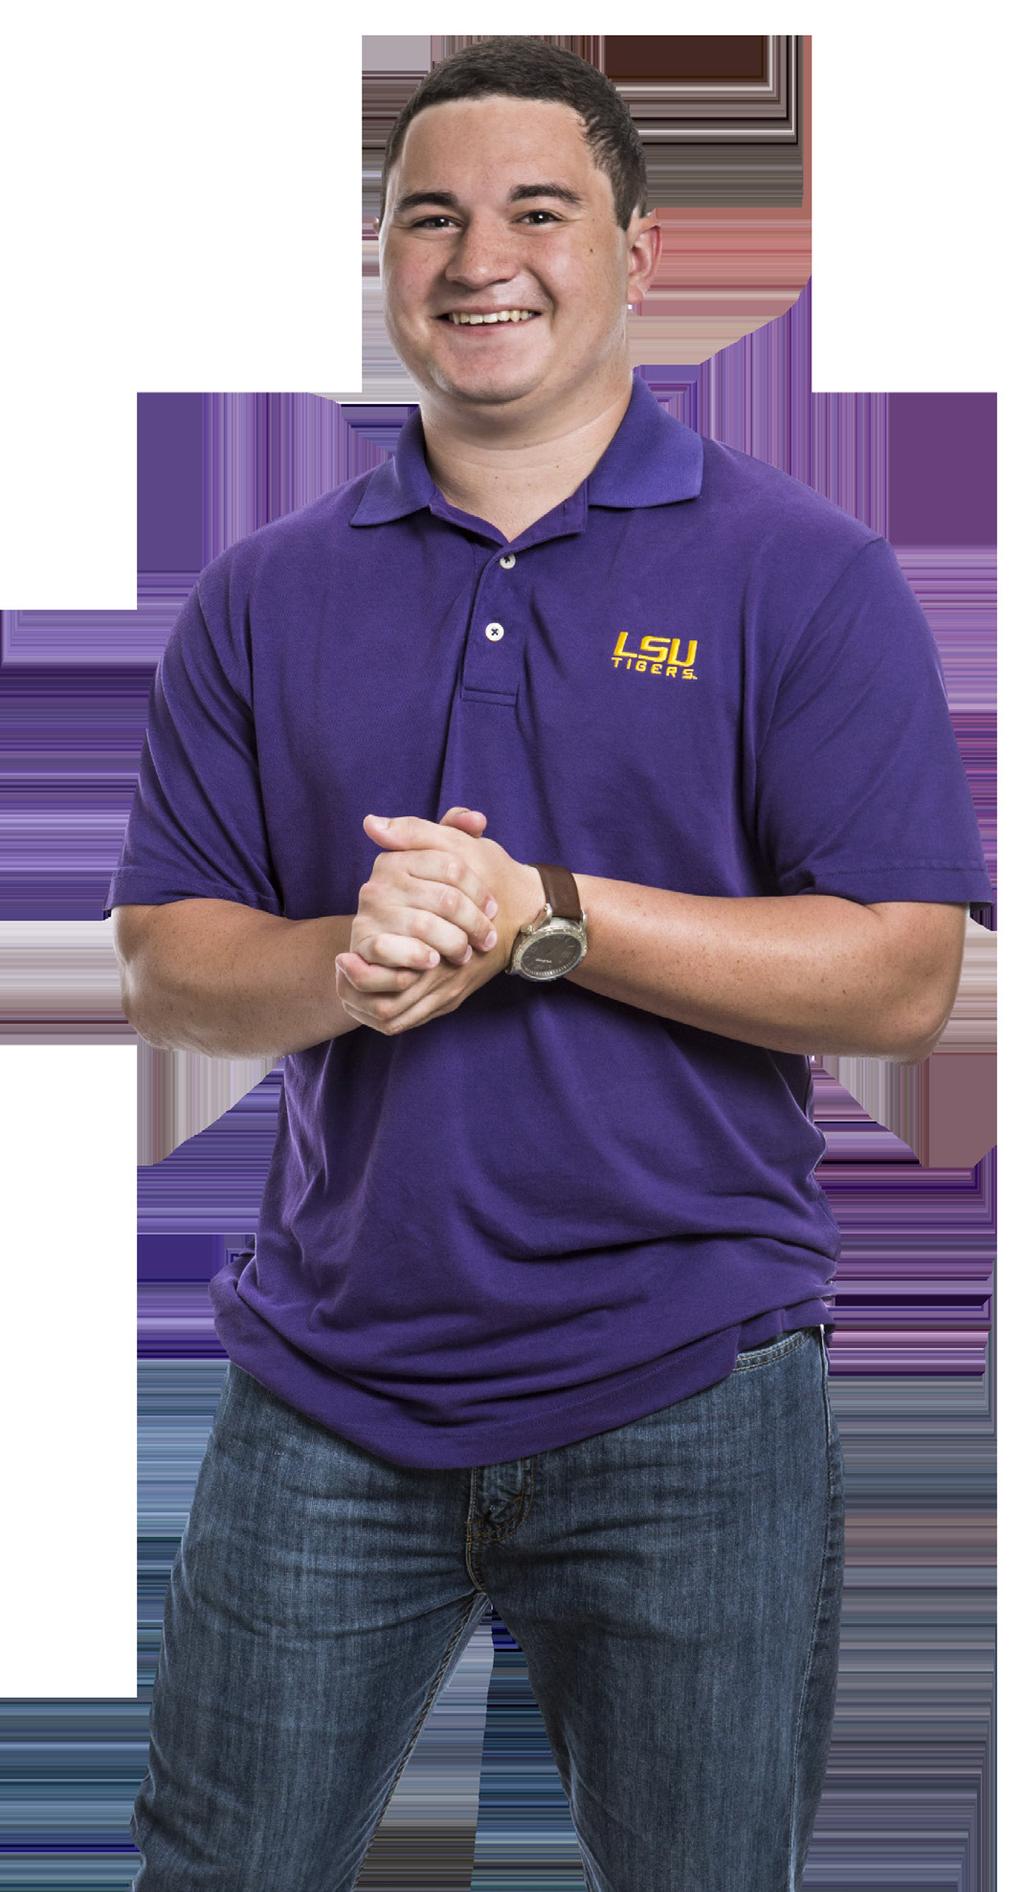 STUDENT SUPPORT SERVICES Since 1978, Student Support Services (SSS), a U.S. Department of Education TRIO program, has been an essential retention program in University College, making an impact on LSU students for 37 years.